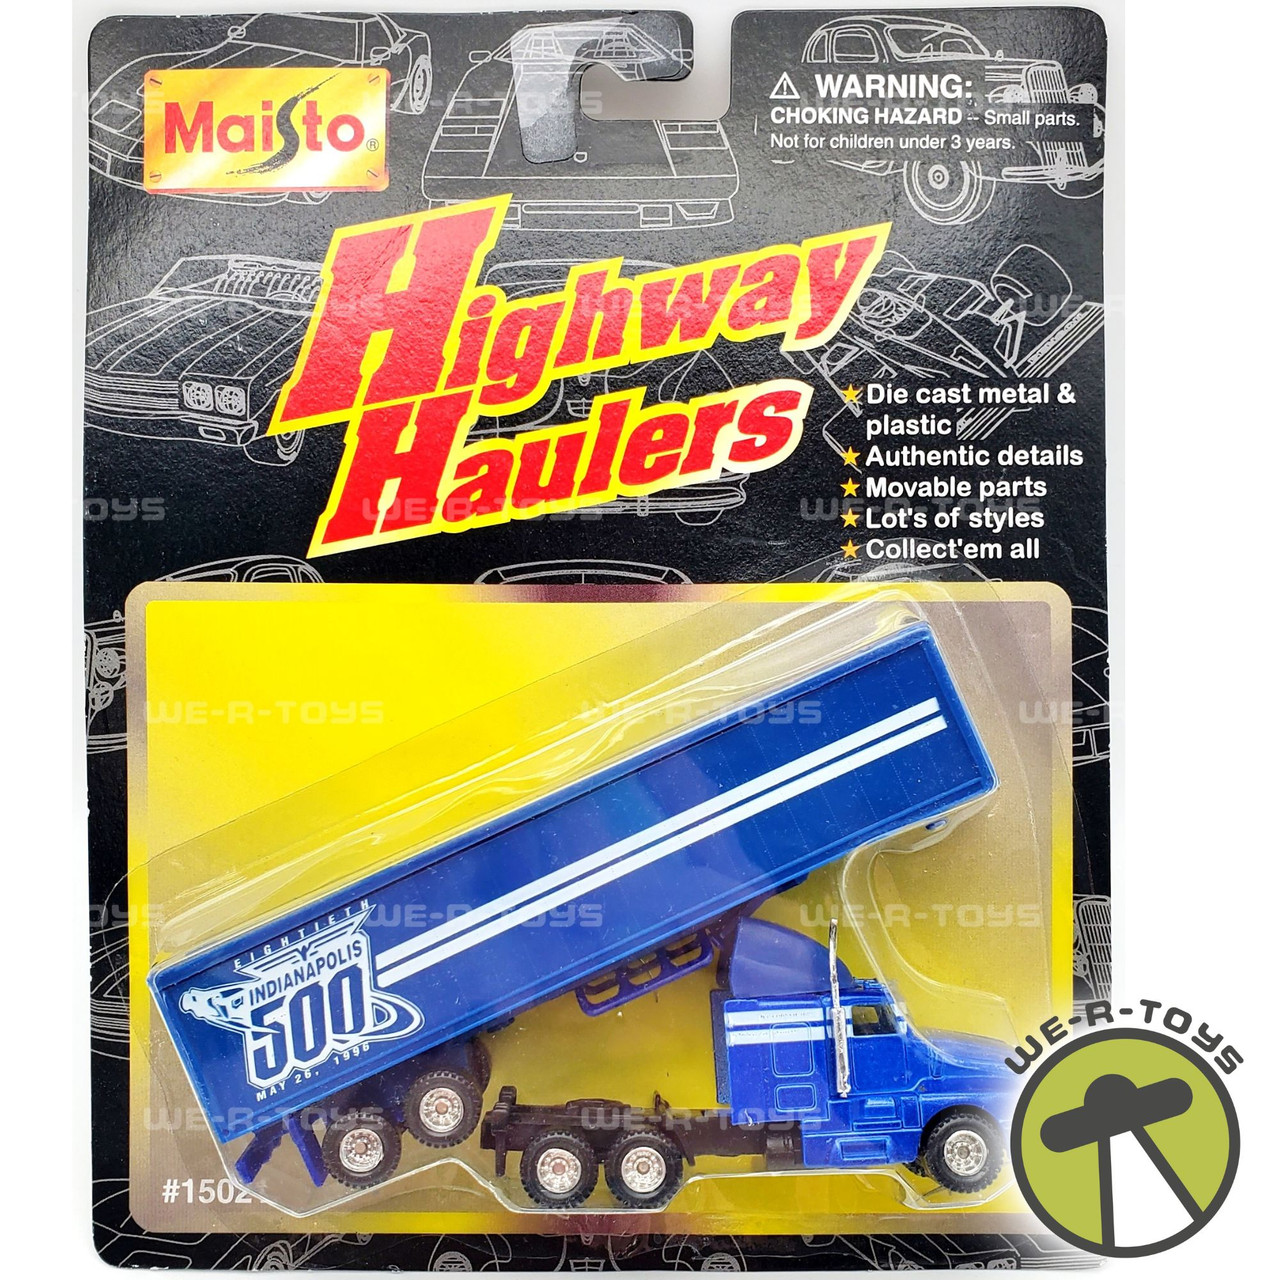 Maisto Highway Haulers Die Cast and Plastic Blue Truck Indianapolis 500 NRFP